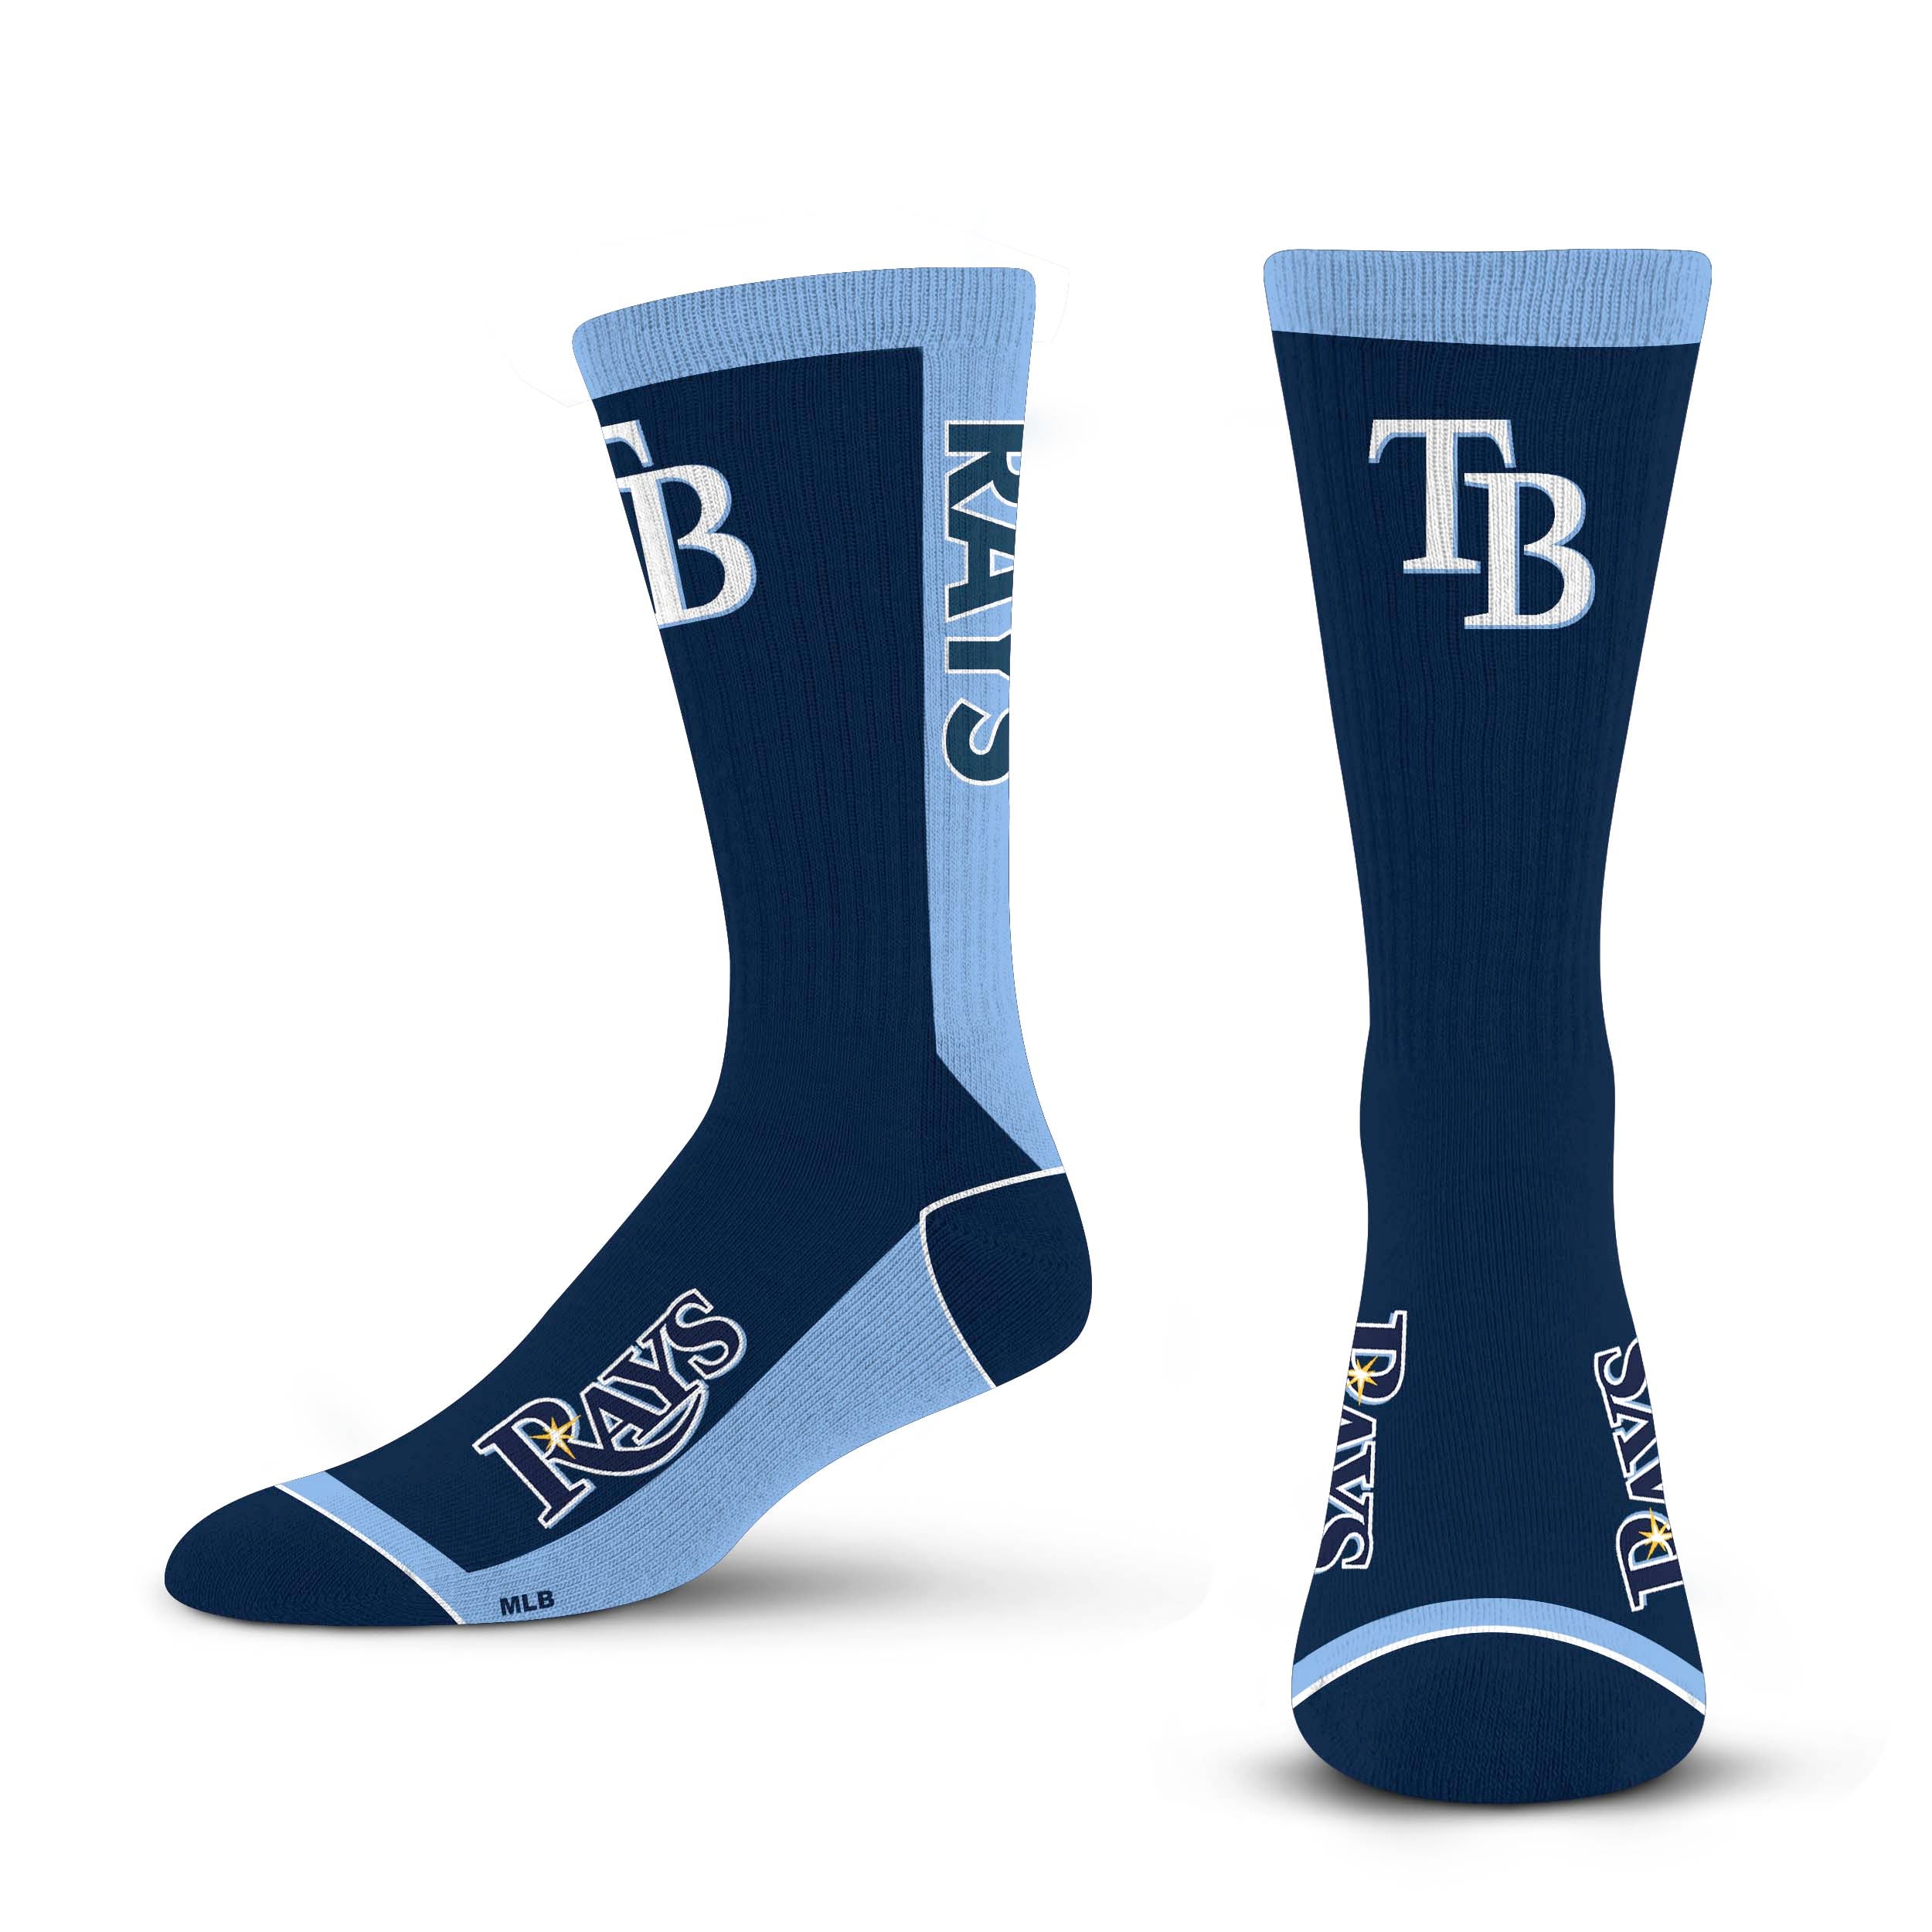 Tampa Bay Rays – For Bare Feet